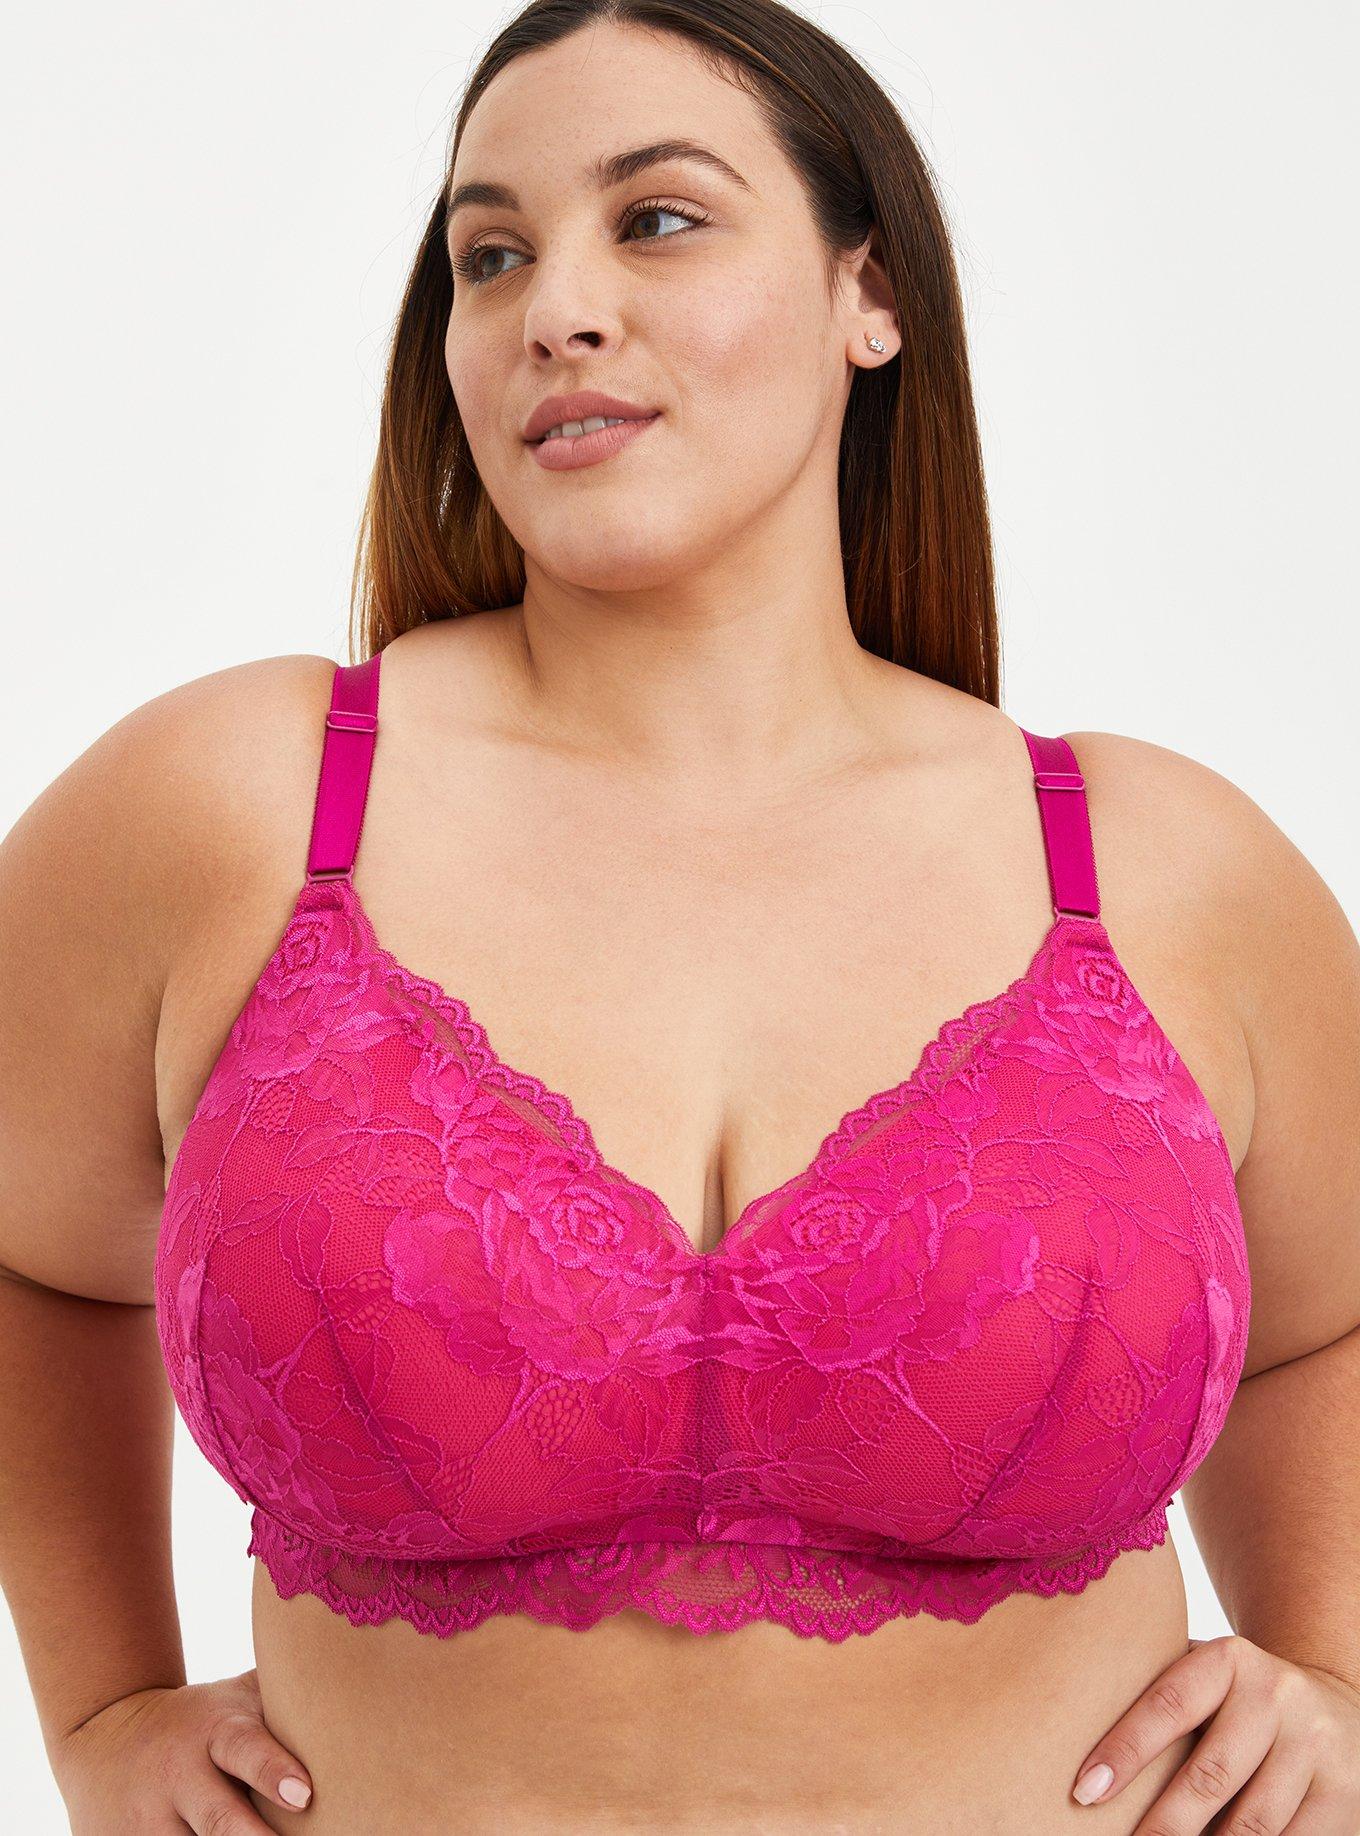 FRUIT OF THE LOOM 42DD Neon Pink 42 DD Lined Seamless FT468 Wire Free Bra 